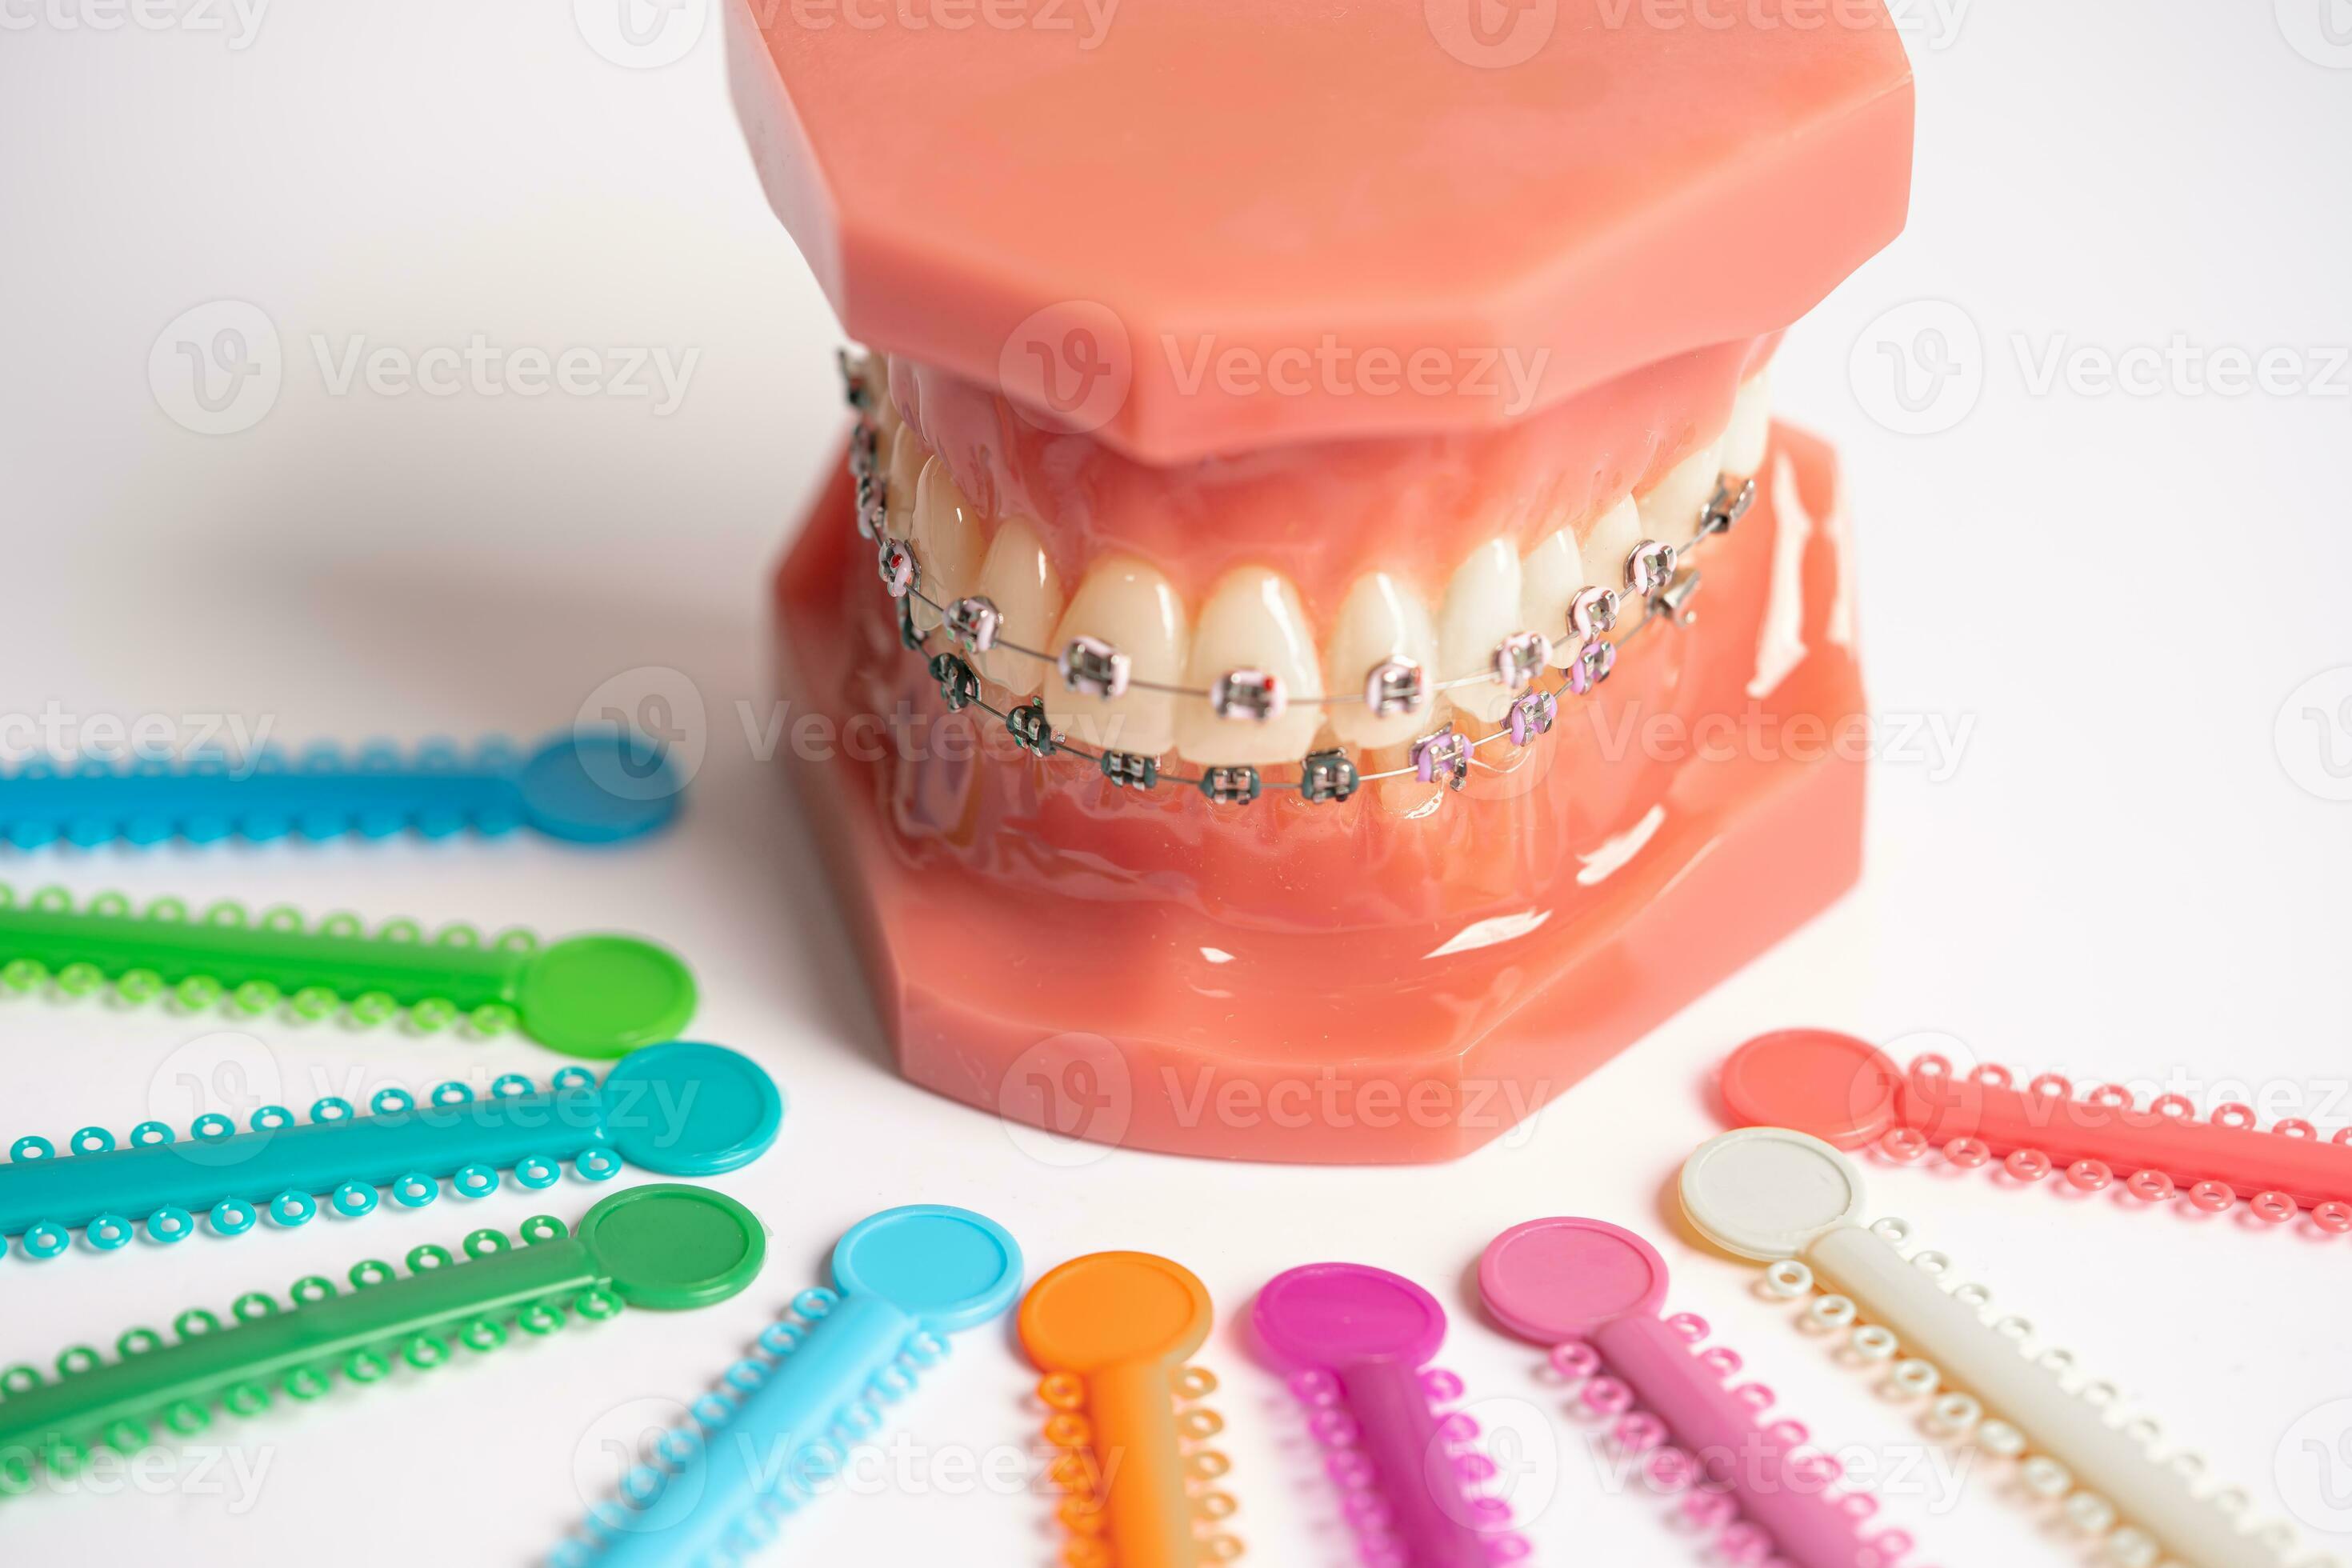 Orthodontic ligatures rings and ties, elastic rubber bands on orthodontic  braces, model for dentist studying about dentistry. 33303918 Stock Photo at  Vecteezy